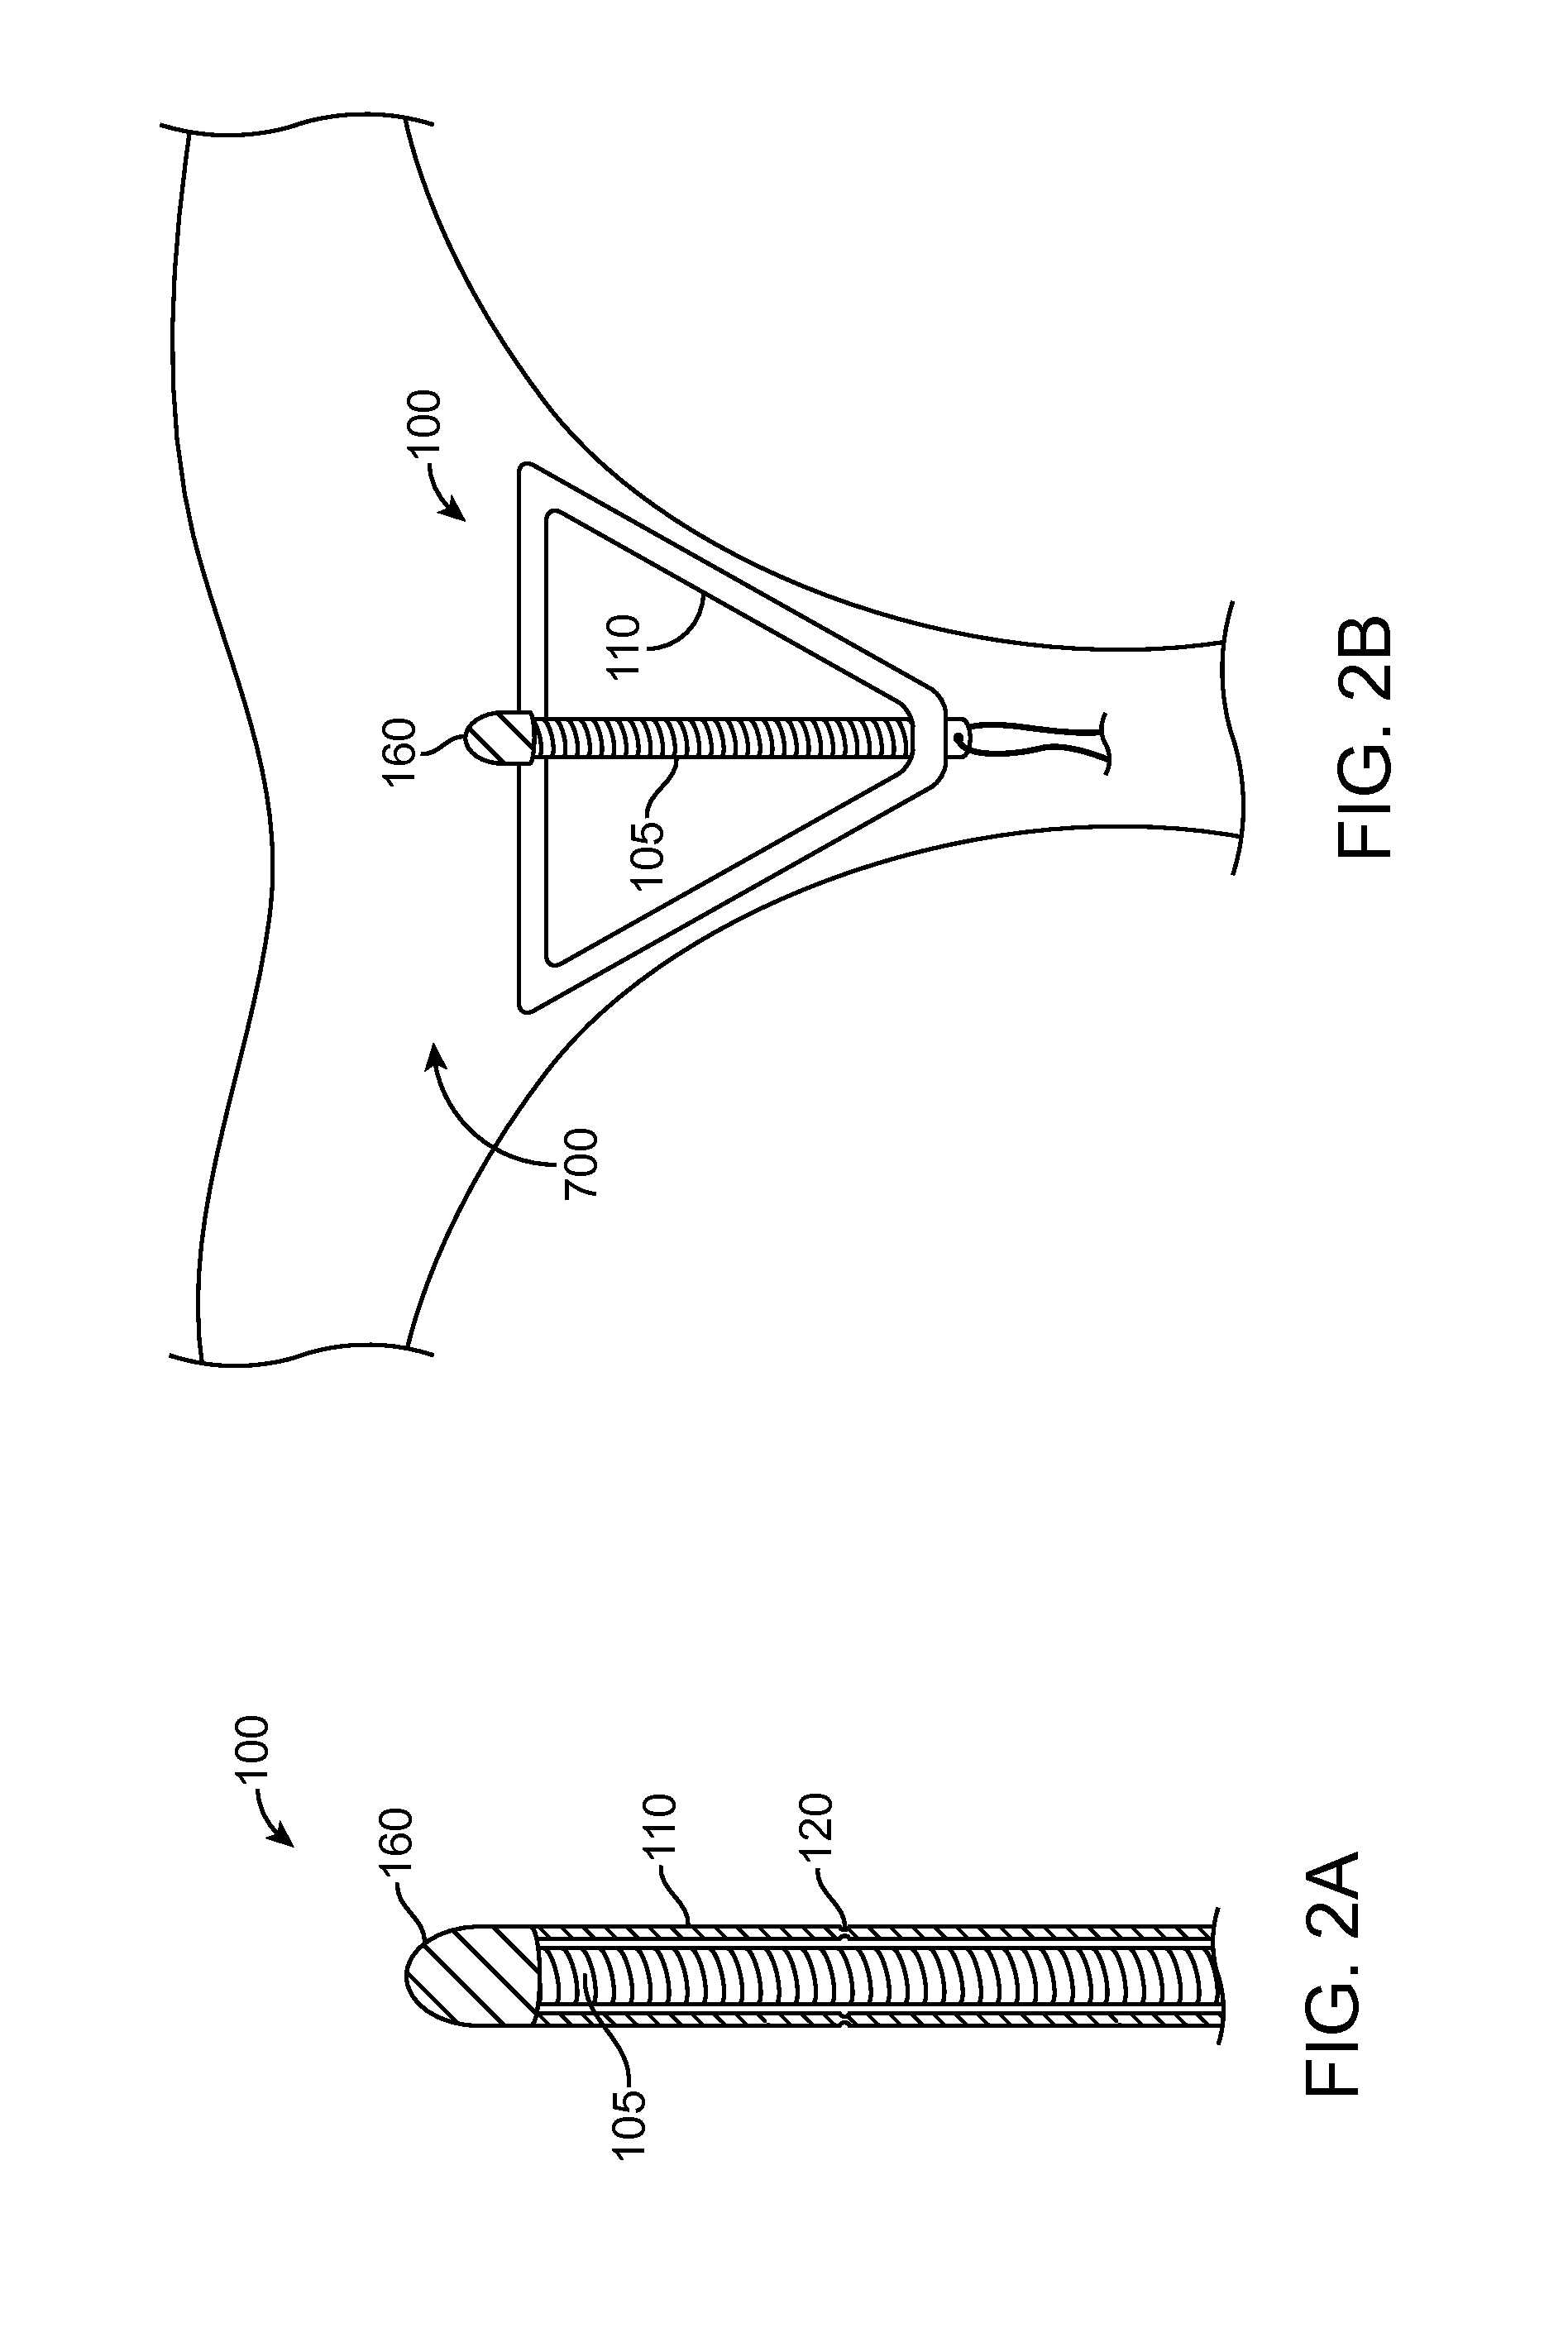 Intra-uterine device and related methods